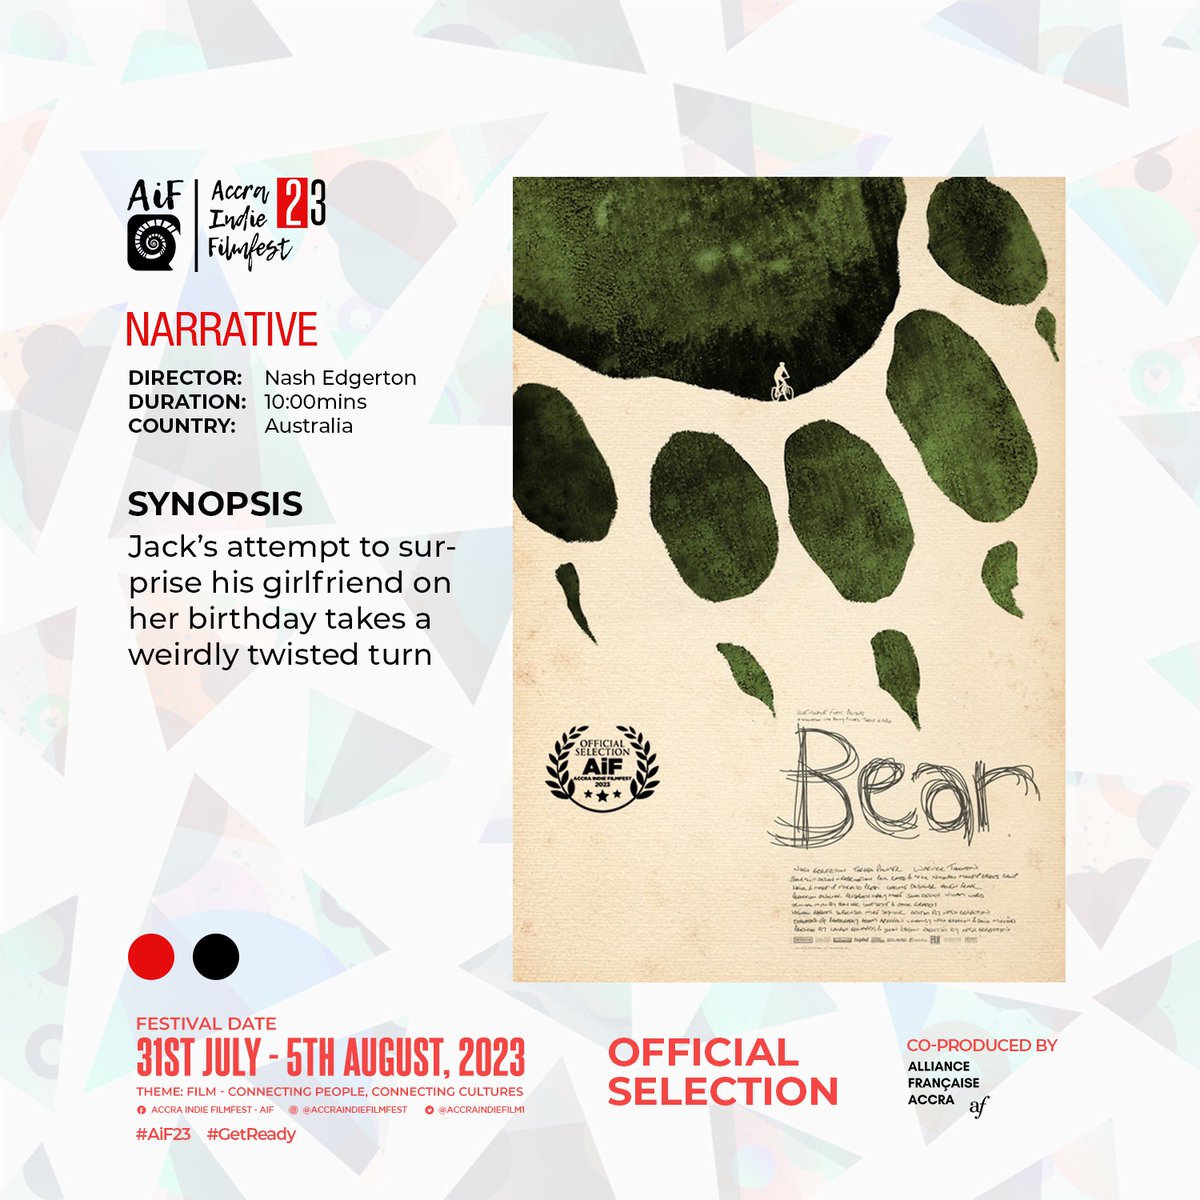 Road to AiF23 and here comes a narrative film 'BEAR' directed by Nash Edgerton and representing Australia at this year's edition of the festival.

Festival Date: 31 July to 5 August 2023.
Venue: Alliance Francaise, Accra

Don't miss out.